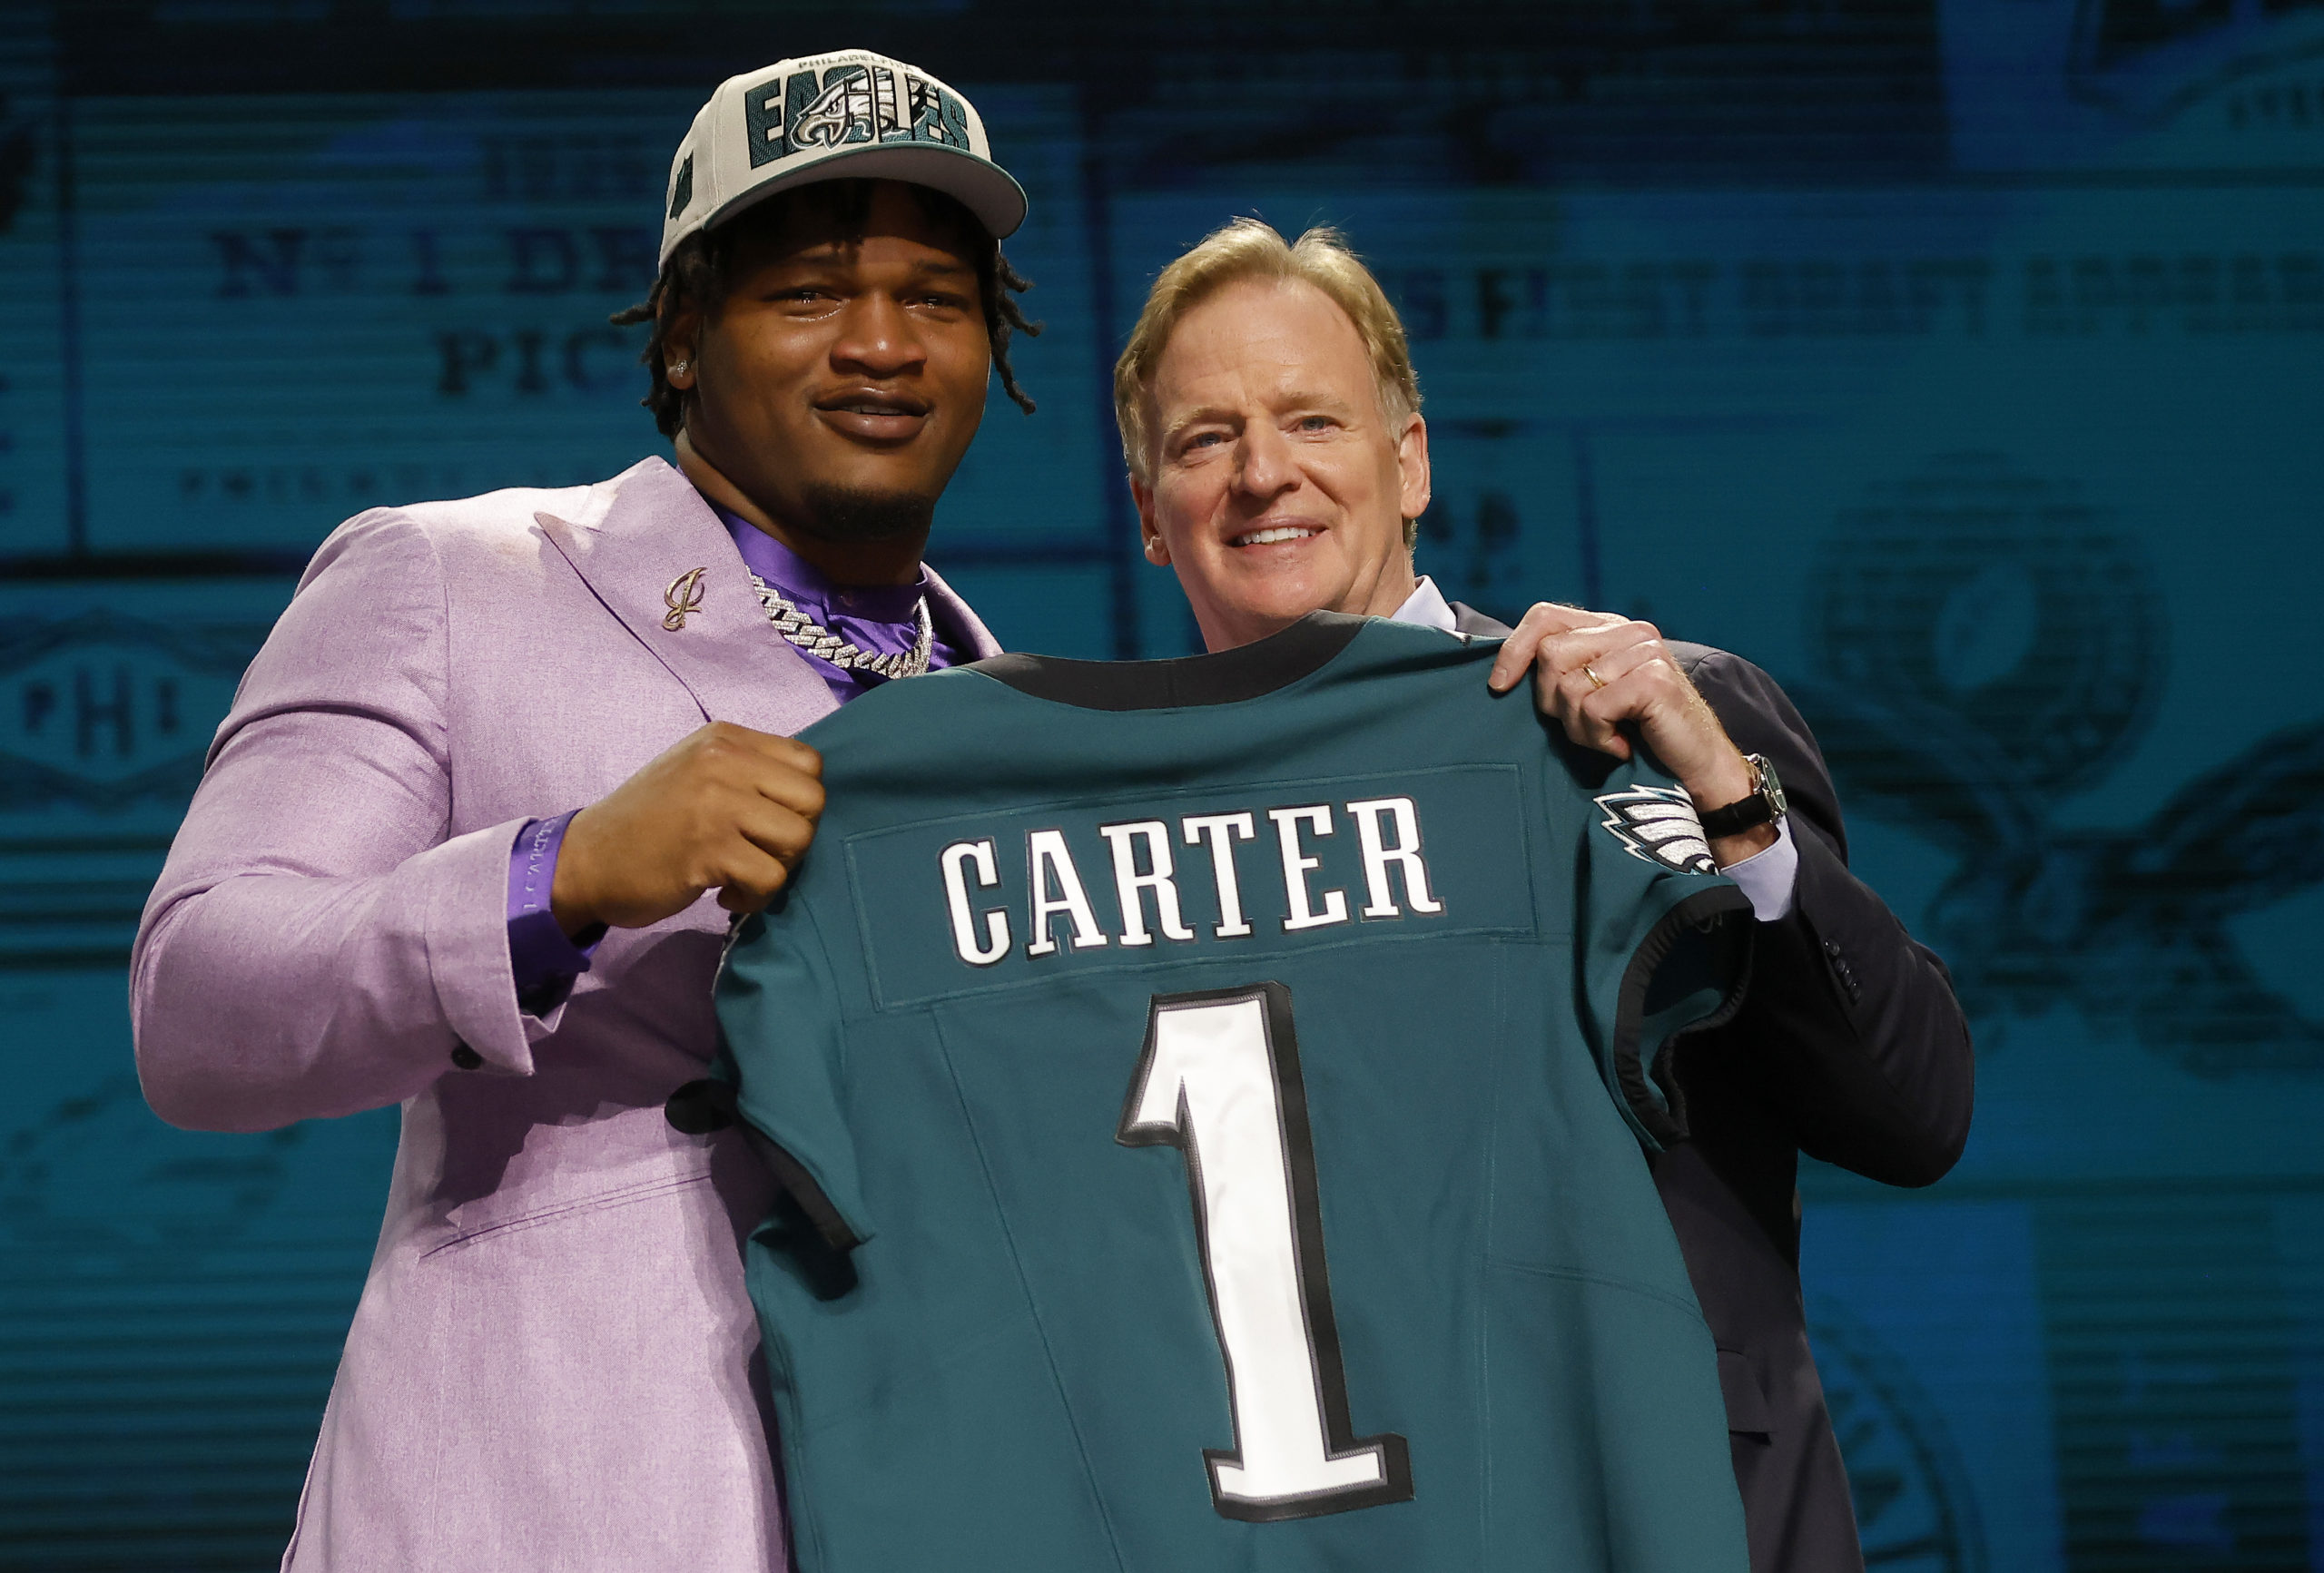 KANSAS CITY, MISSOURI - APRIL 27: (L-R) Jalen Carter poses with NFL Commissioner Roger Goodell after being selected ninth overall by the Philadelphia Eagles during the first round of the 2023 NFL Draft at Union Station on April 27, 2023 in Kansas City, Missouri. David Eulitt/Getty Images